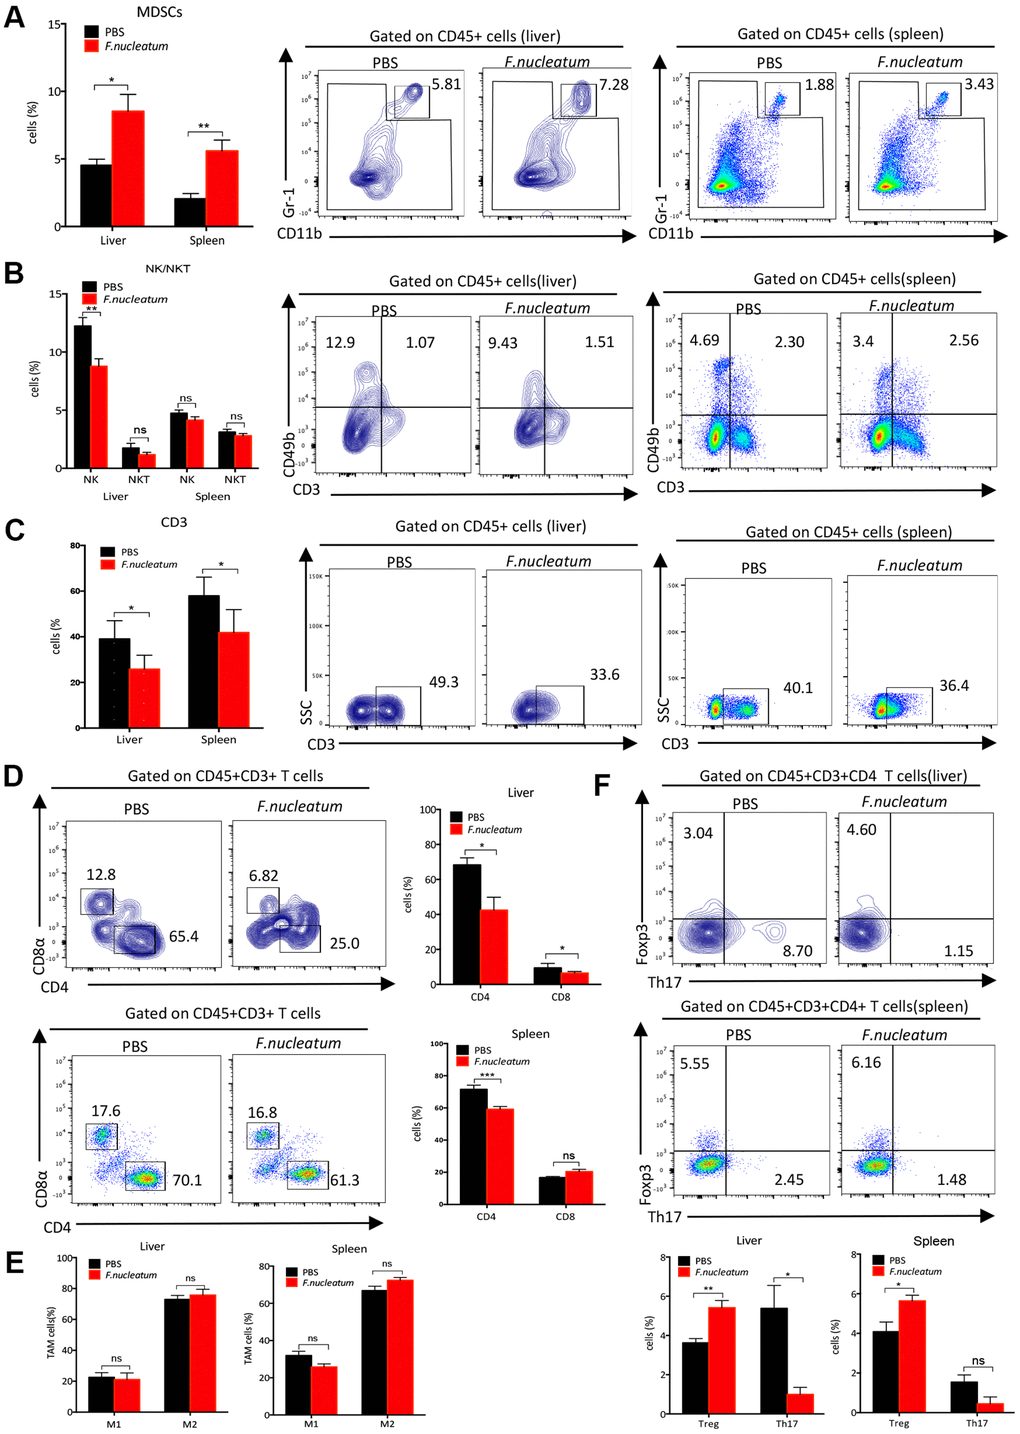 Fusobacterium nucleatum aggravates colorectal cancer liver metastasis by restructuring the liver immune microenvironment. (A) Myeloid-derived suppressor cells (MDSCs; CD45+CD11b+Gr-1+) in the liver and spleen were determined by flow cytometry. (B) NK (CD45+CD3-CD49b+) and NKT cells (CD45+CD3+CD49b+) were analyzed by flow cytometry. (C, D) CD3+T cells (C), CD3+CD4+T cells and CD3+CD8+T cells (D) in the liver and spleen were assessed by flow cytometry and analyzed by gating on lymphocytes and CD3+ cells. (E) Tumor-associated macrophages (CD45+CD11b+F4/80+) in the liver and spleen were determined by flow cytometry. (F) Treg cells (CD4+Foxp3+) and Th17 cells (IL17+CD4+) were evaluated by flow cytometry and analyzed by gating on CD4+T cells. Data are presented as mean ± standard deviation (n=5 per group). *P P P 